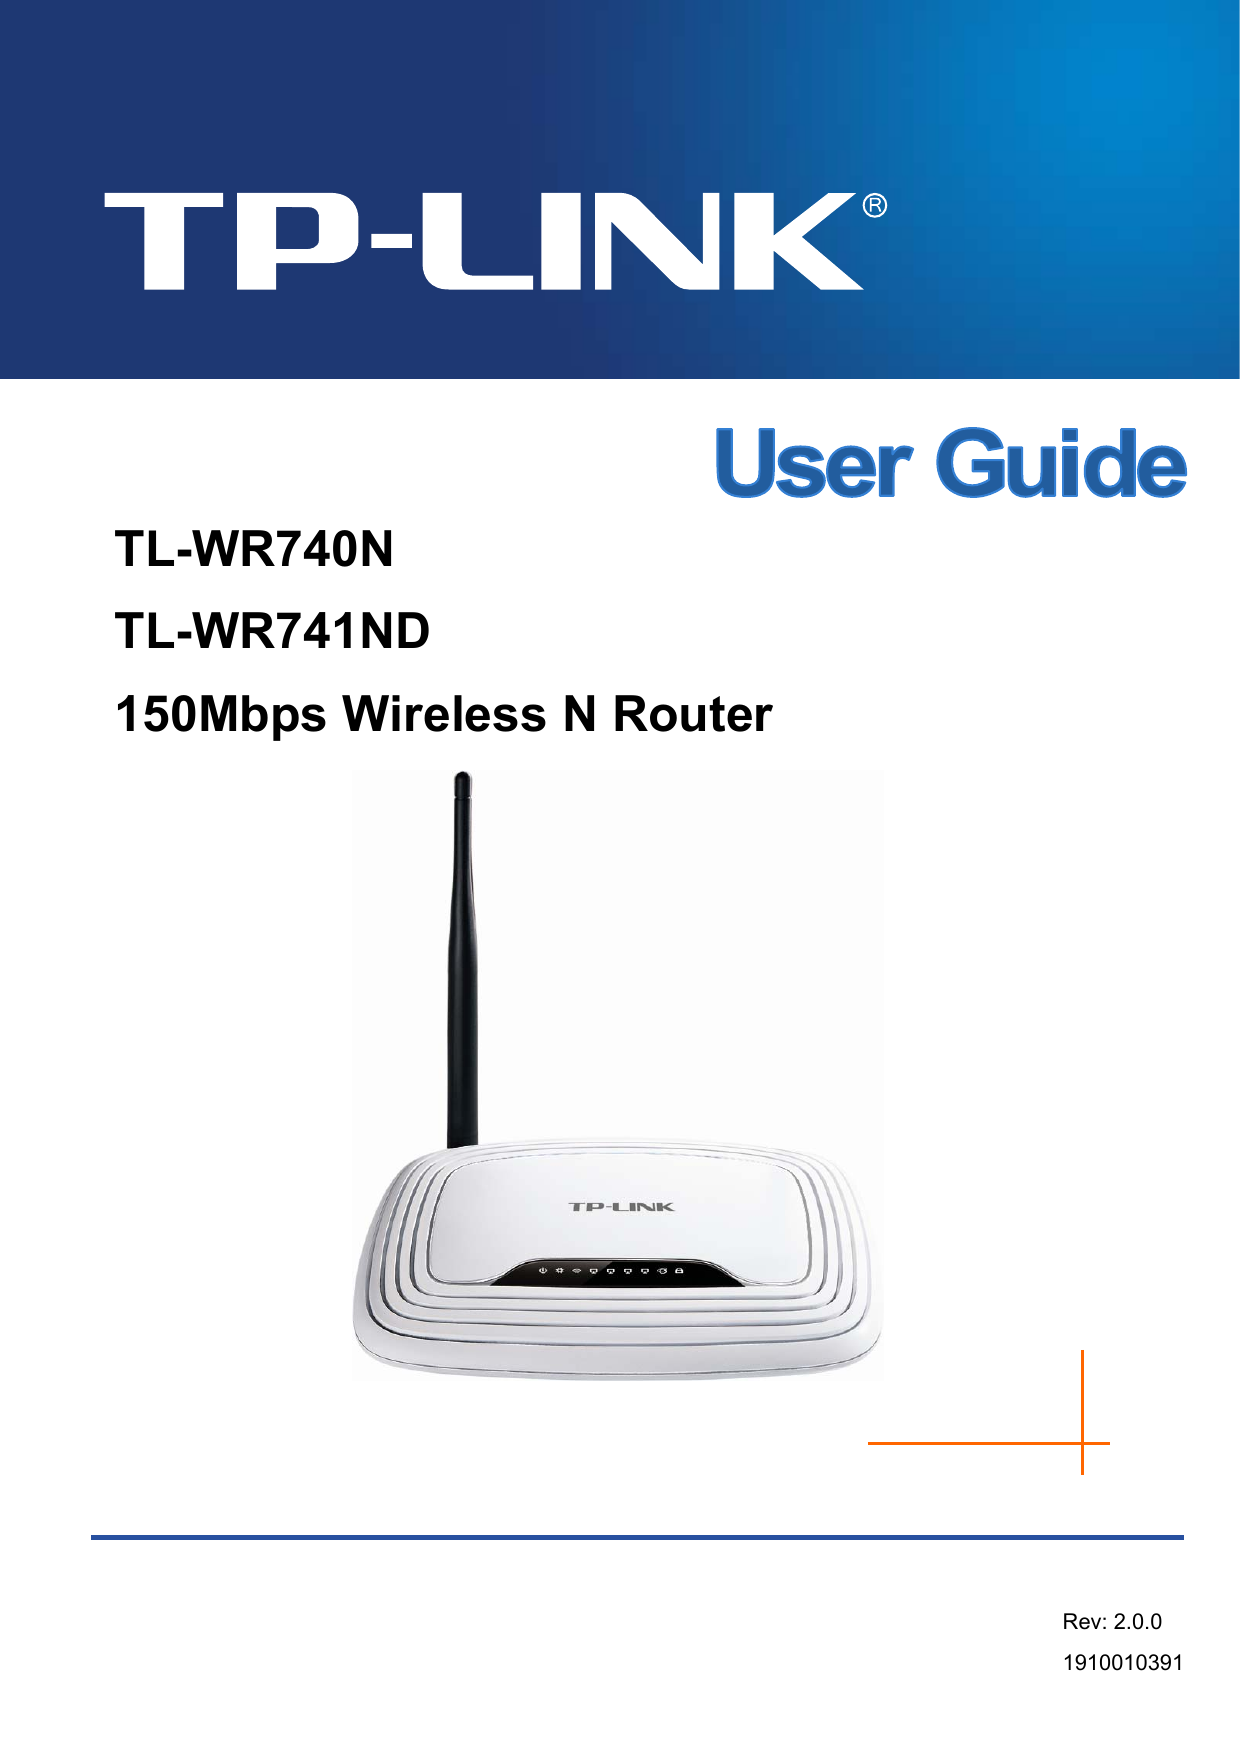   TL-WR740N TL-WR741ND 150Mbps Wireless N Router  Rev: 2.0.0 1910010391   